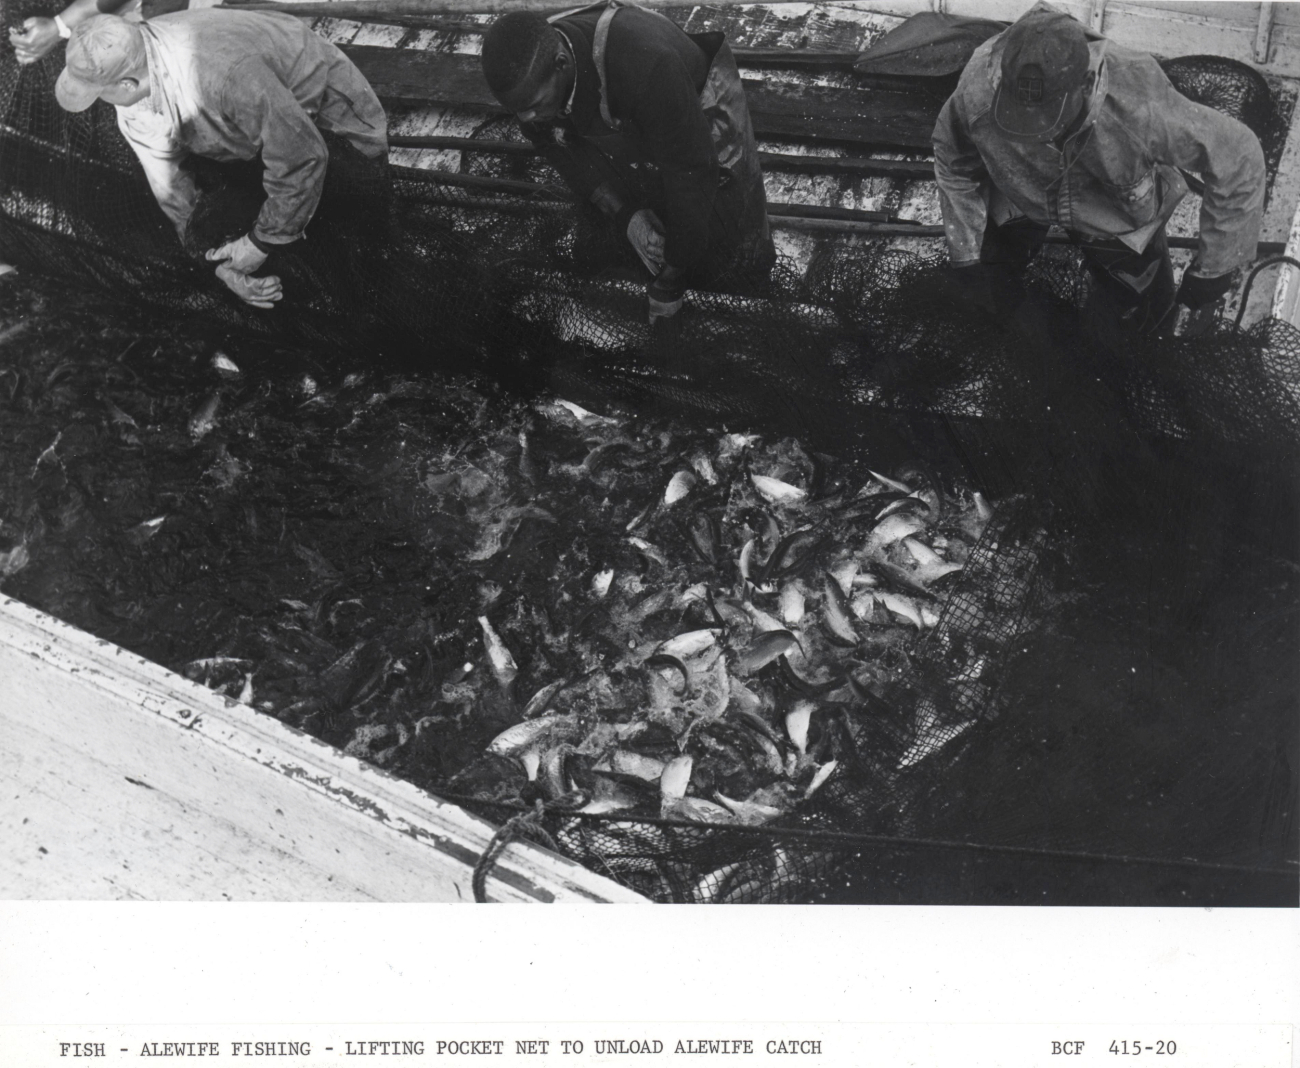 Alewife fishing - Dumping alewife catch into hold of F/V MUNDY POINT